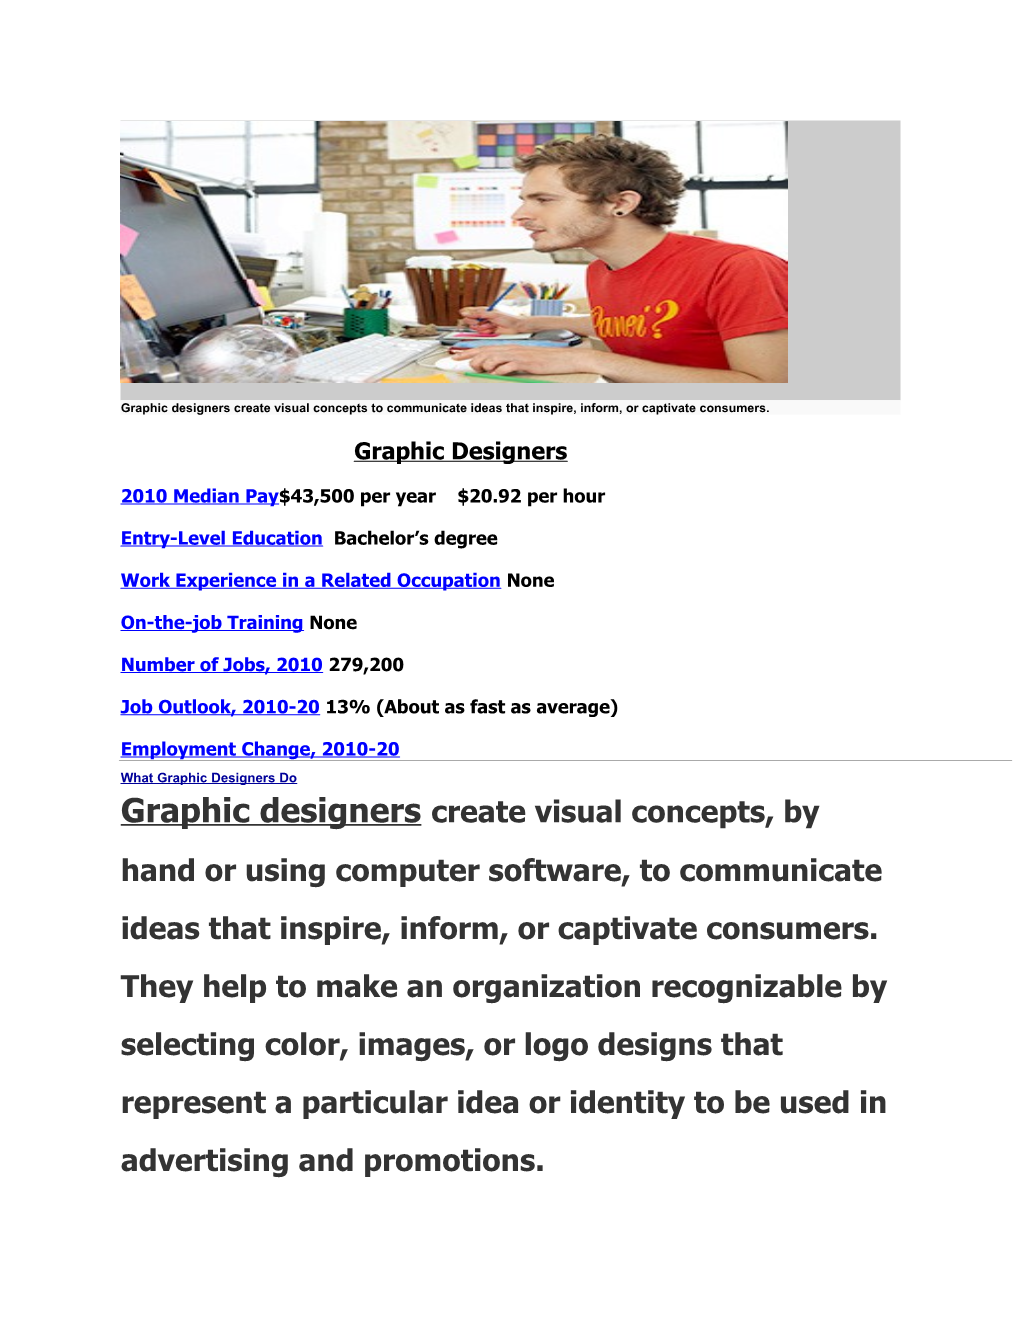 Graphic Designers Create Visual Concepts to Communicate Ideas That Inspire, Inform, Or